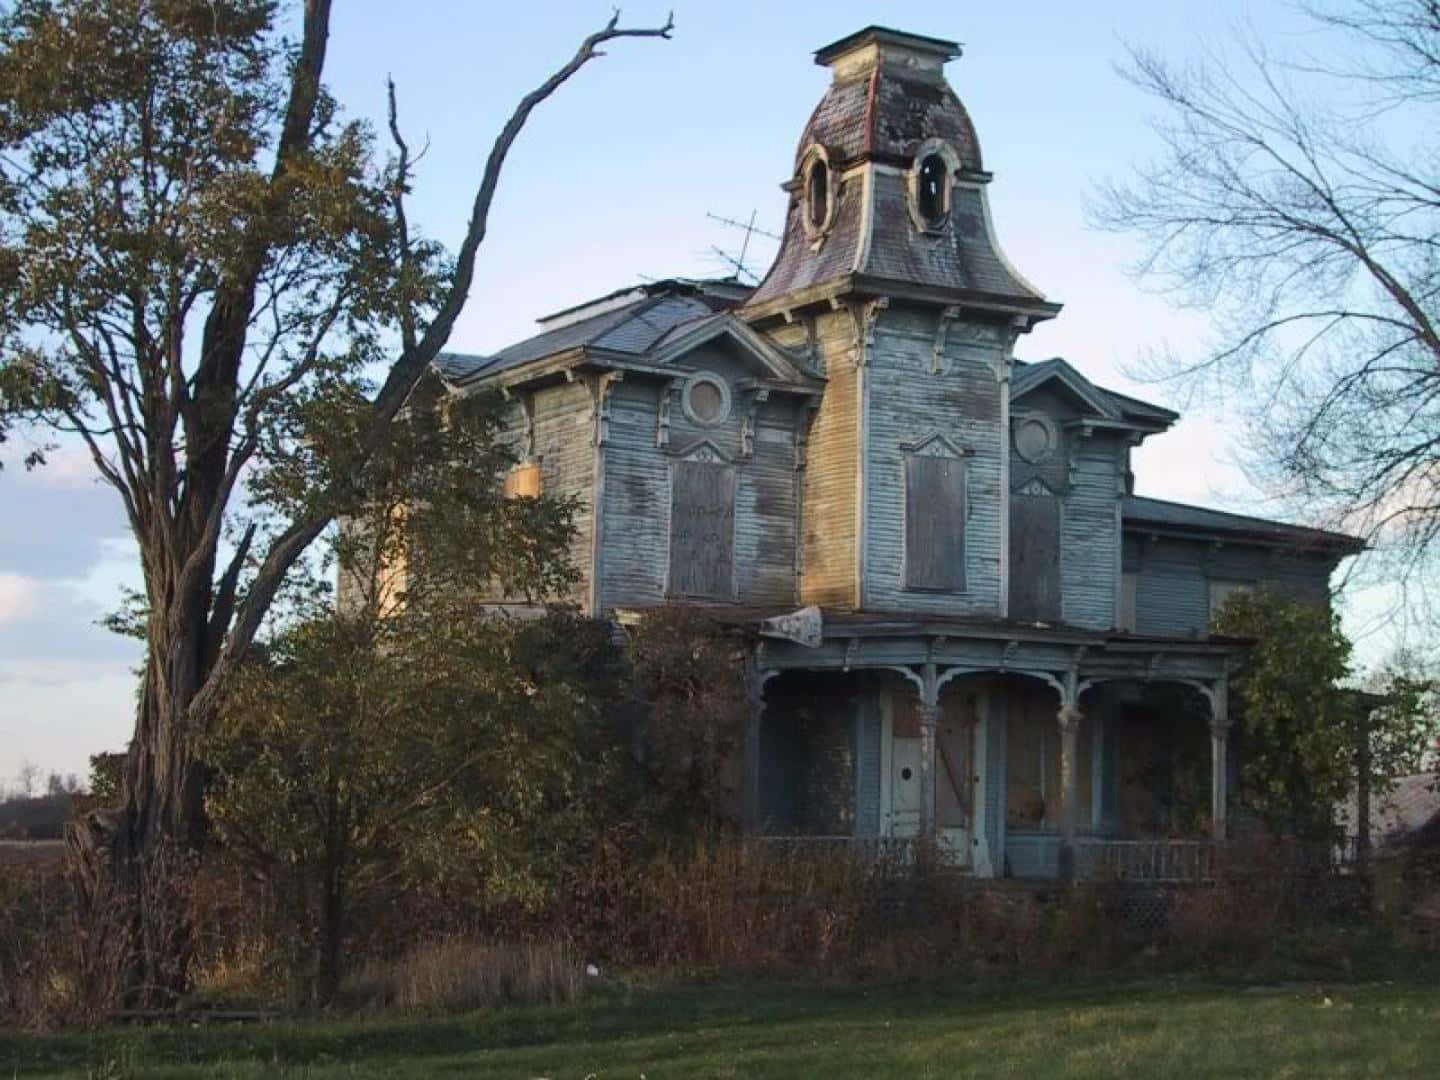 Experience the thrills of a haunted house